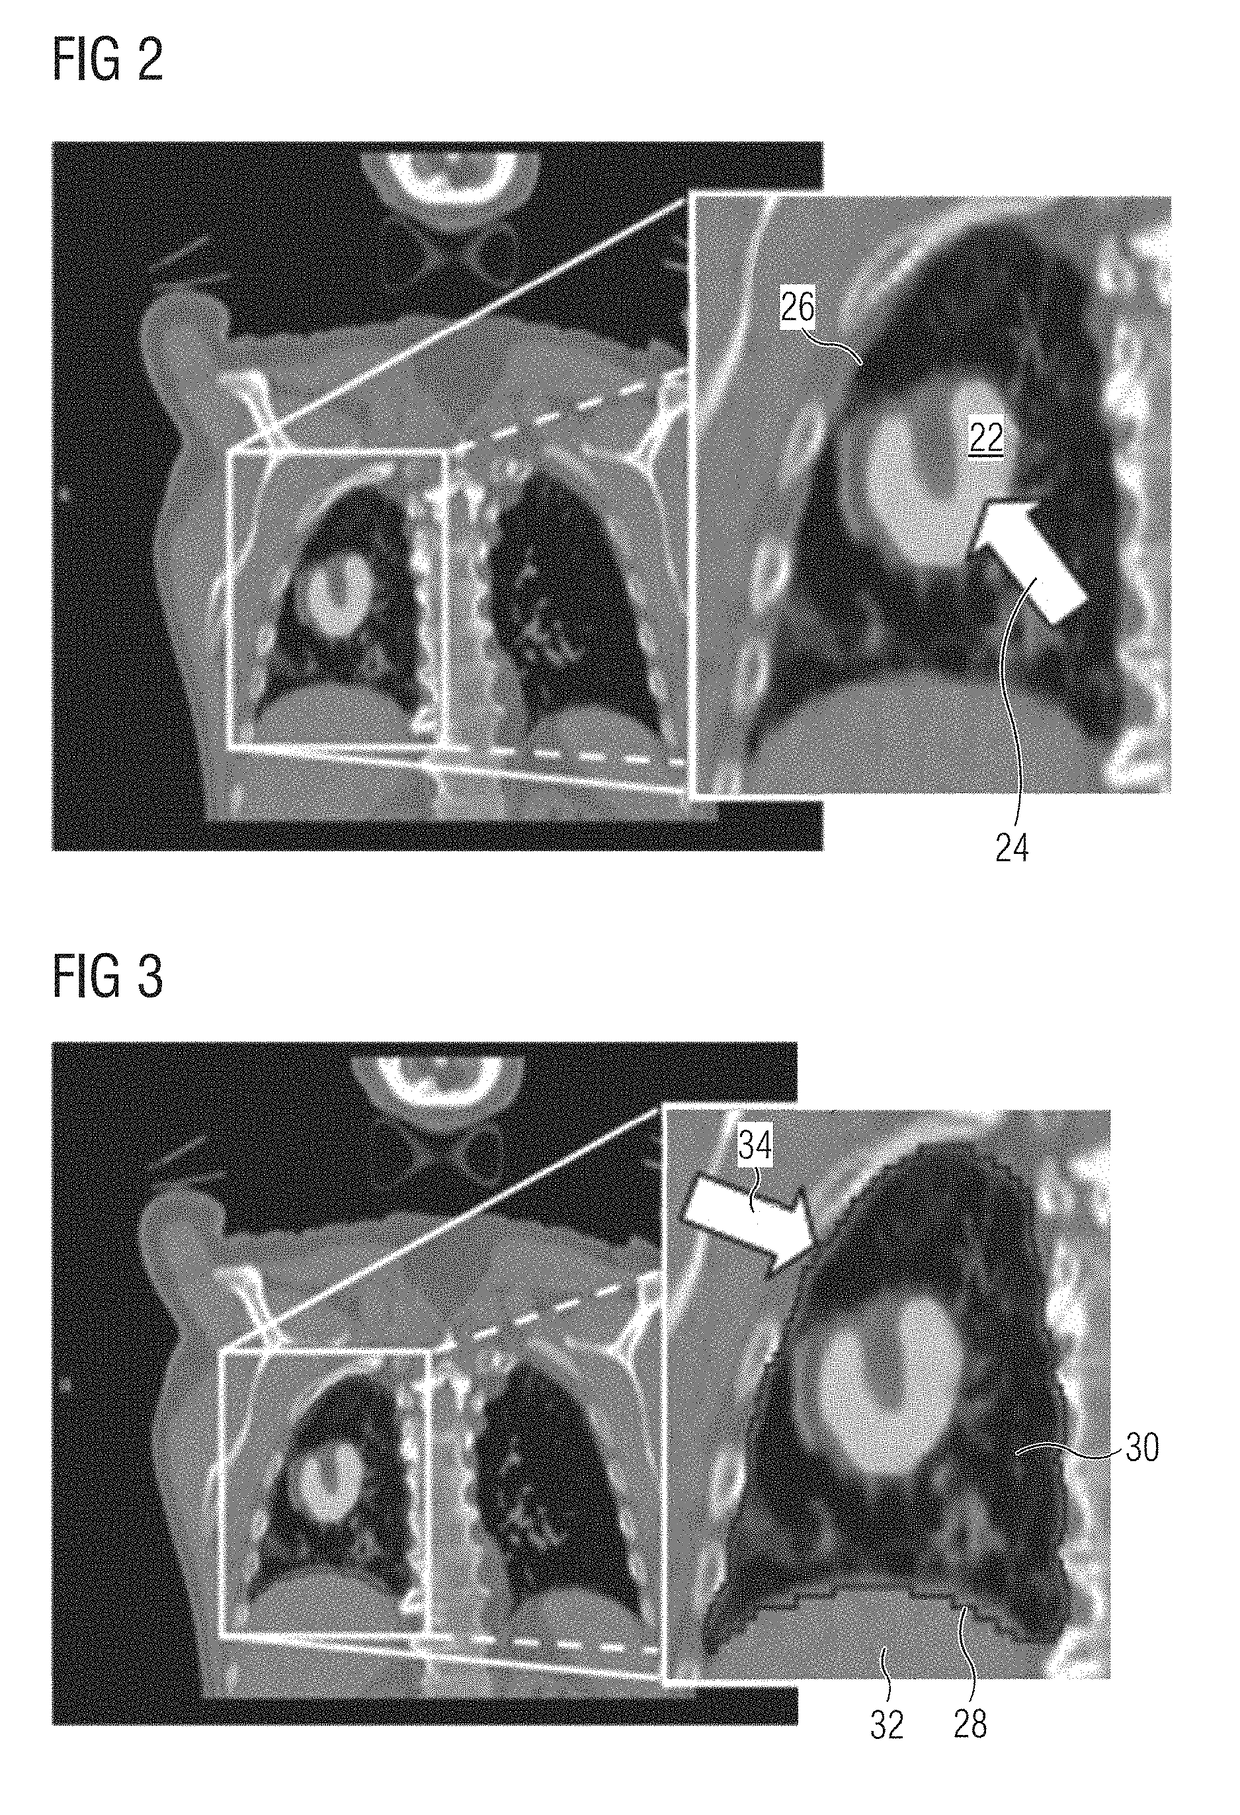 Automatic background region selection for lesion delineation in medical images